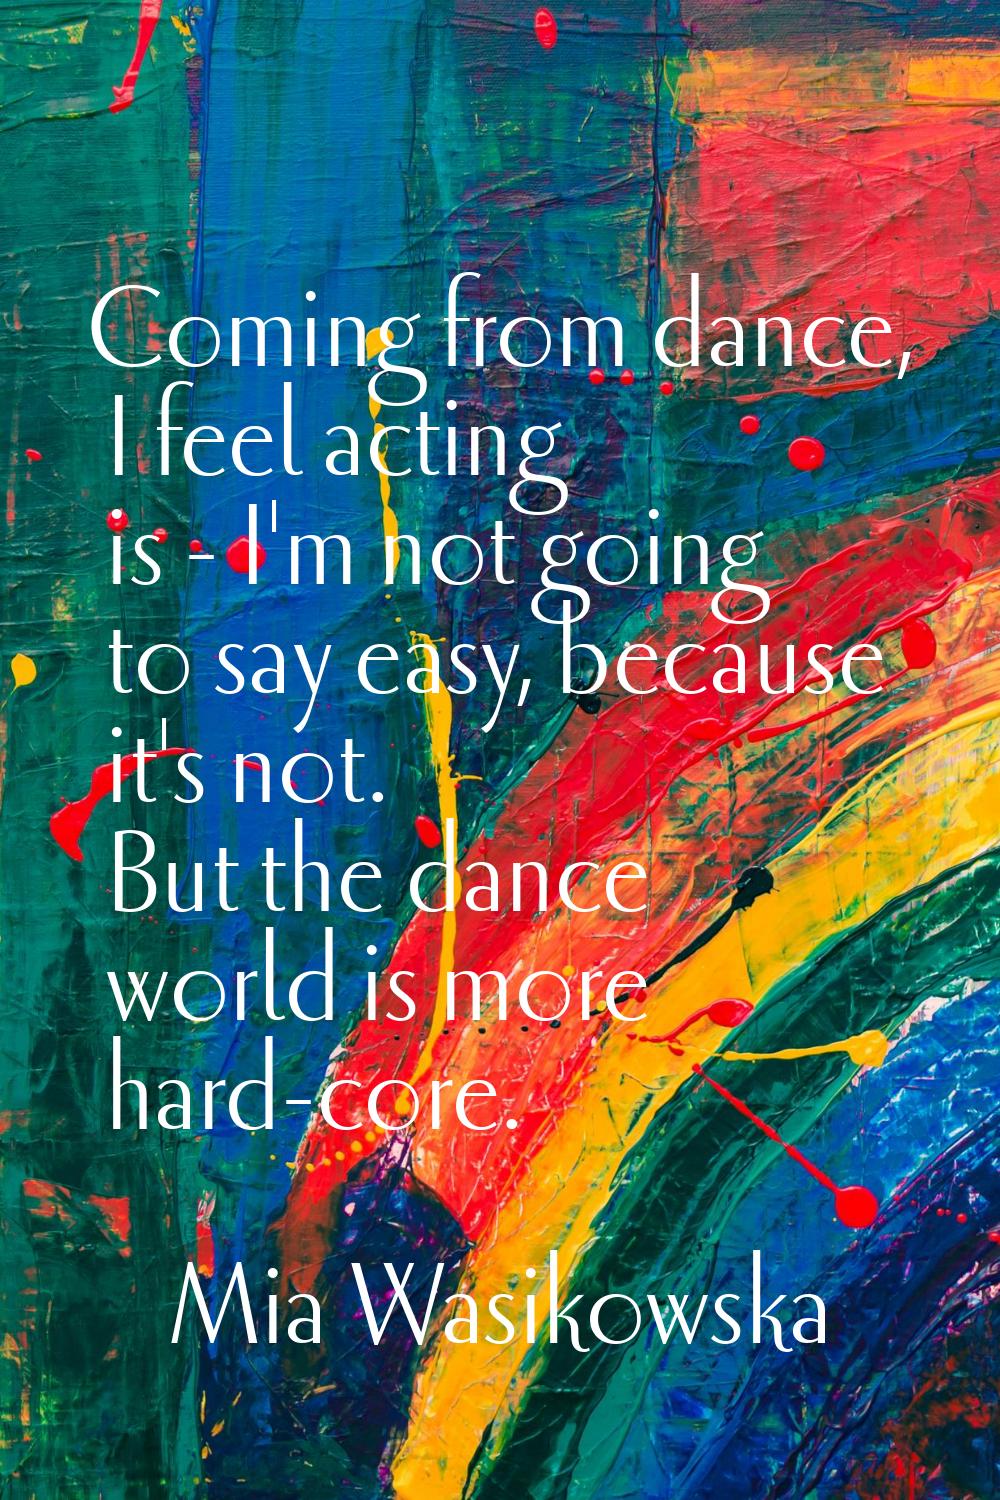 Coming from dance, I feel acting is - I'm not going to say easy, because it's not. But the dance wo